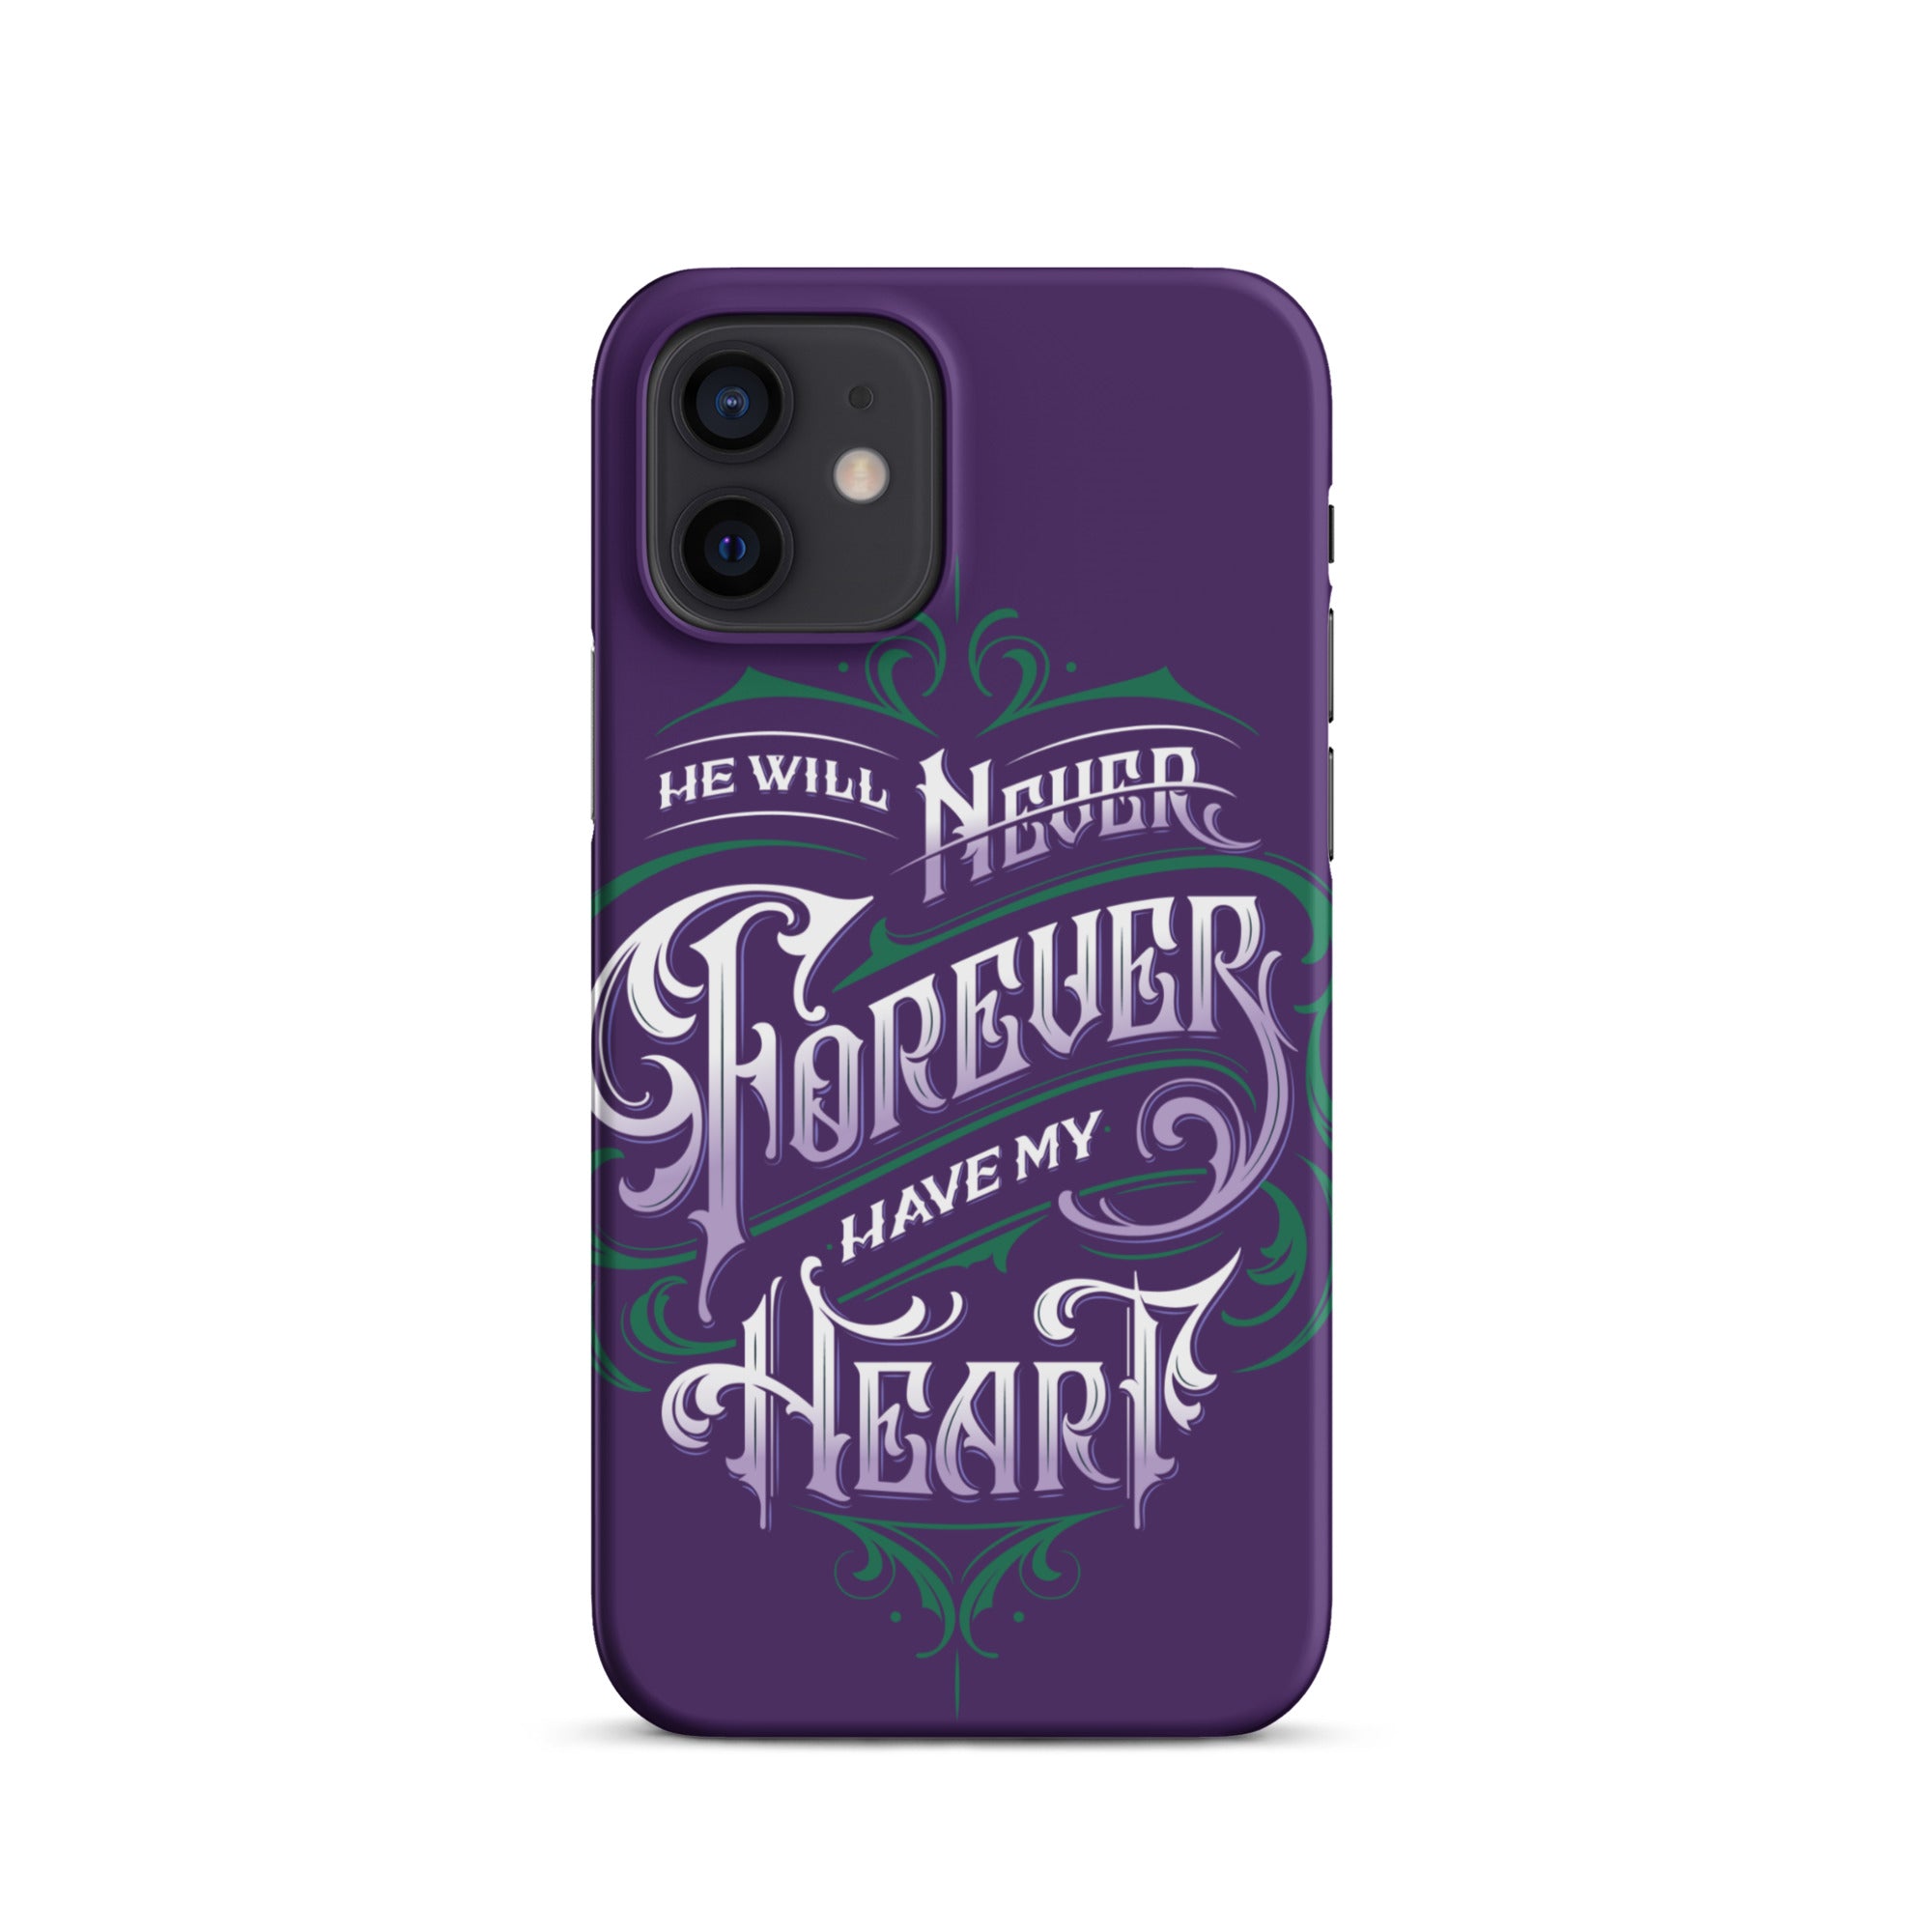 "He will never have my heart" iPhone case